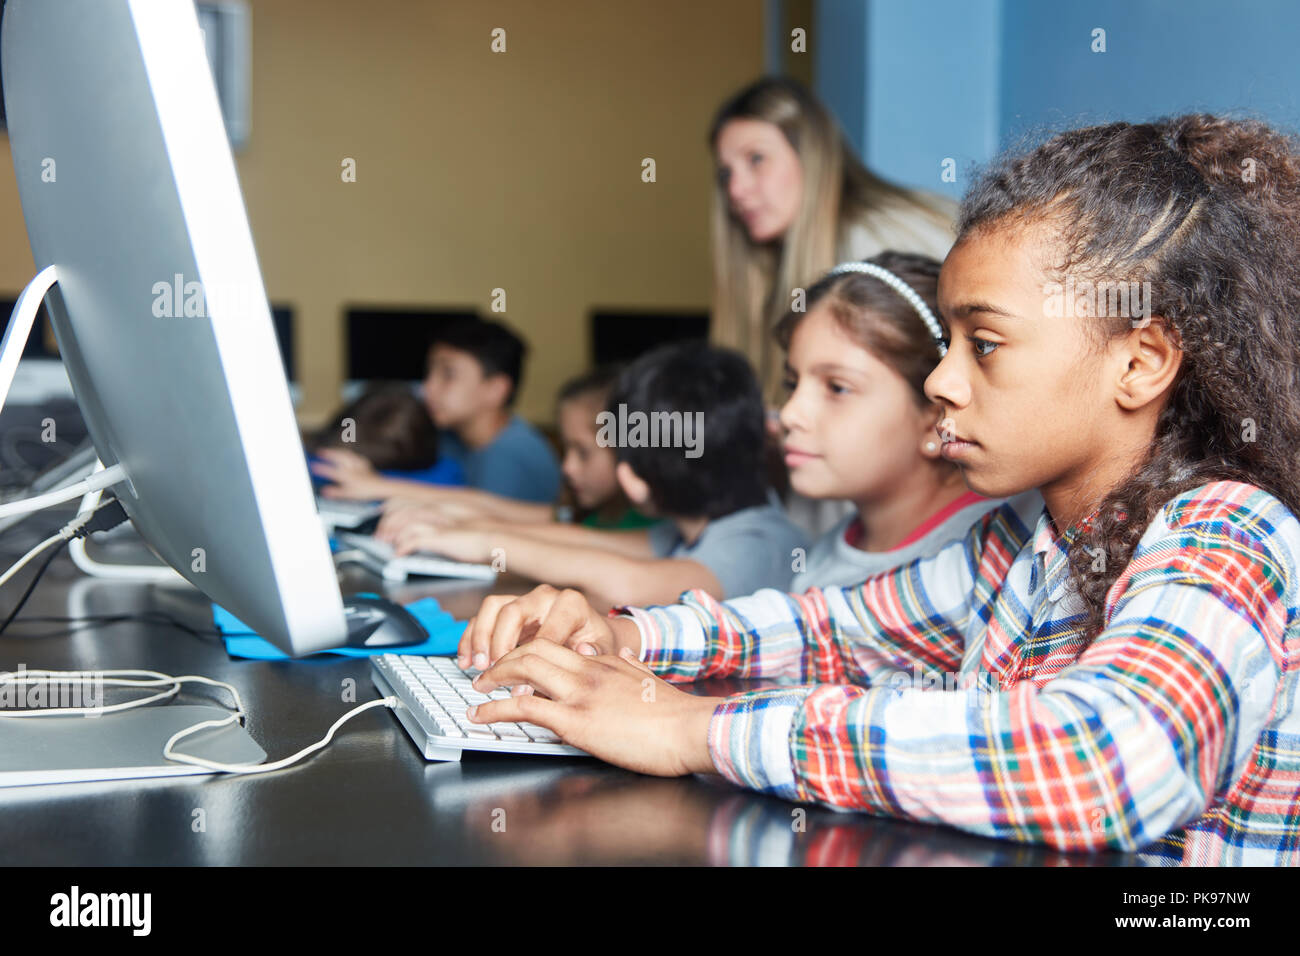 Children learn at the computer in computer science lessons of elementary school Stock Photo